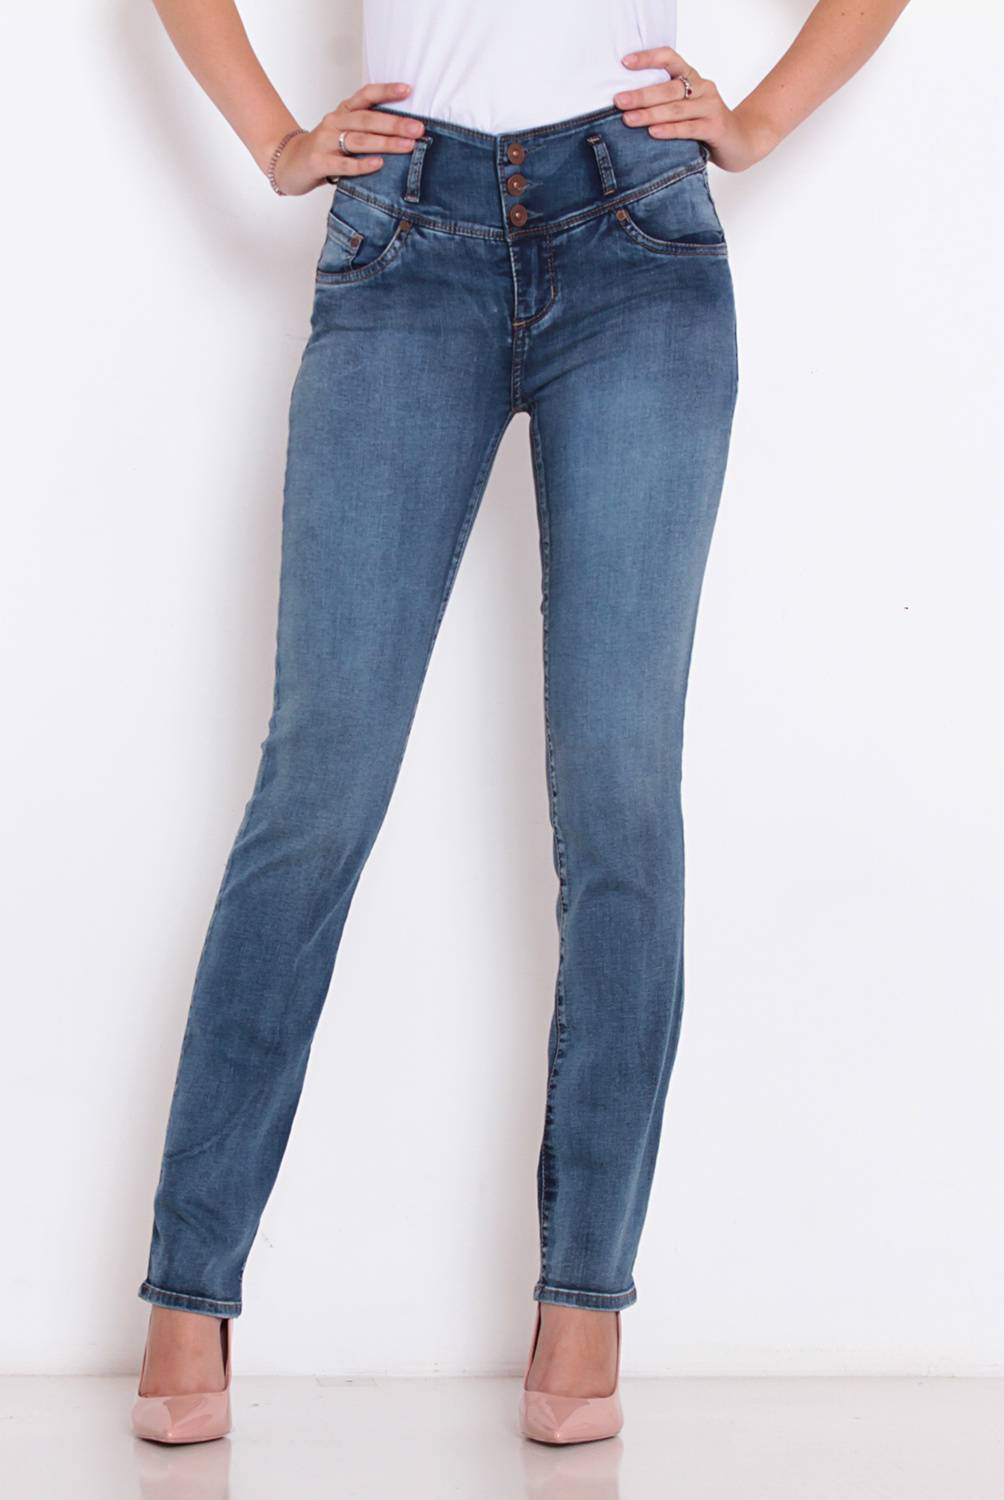  - JEANS WADOS 236945 AZUL 38